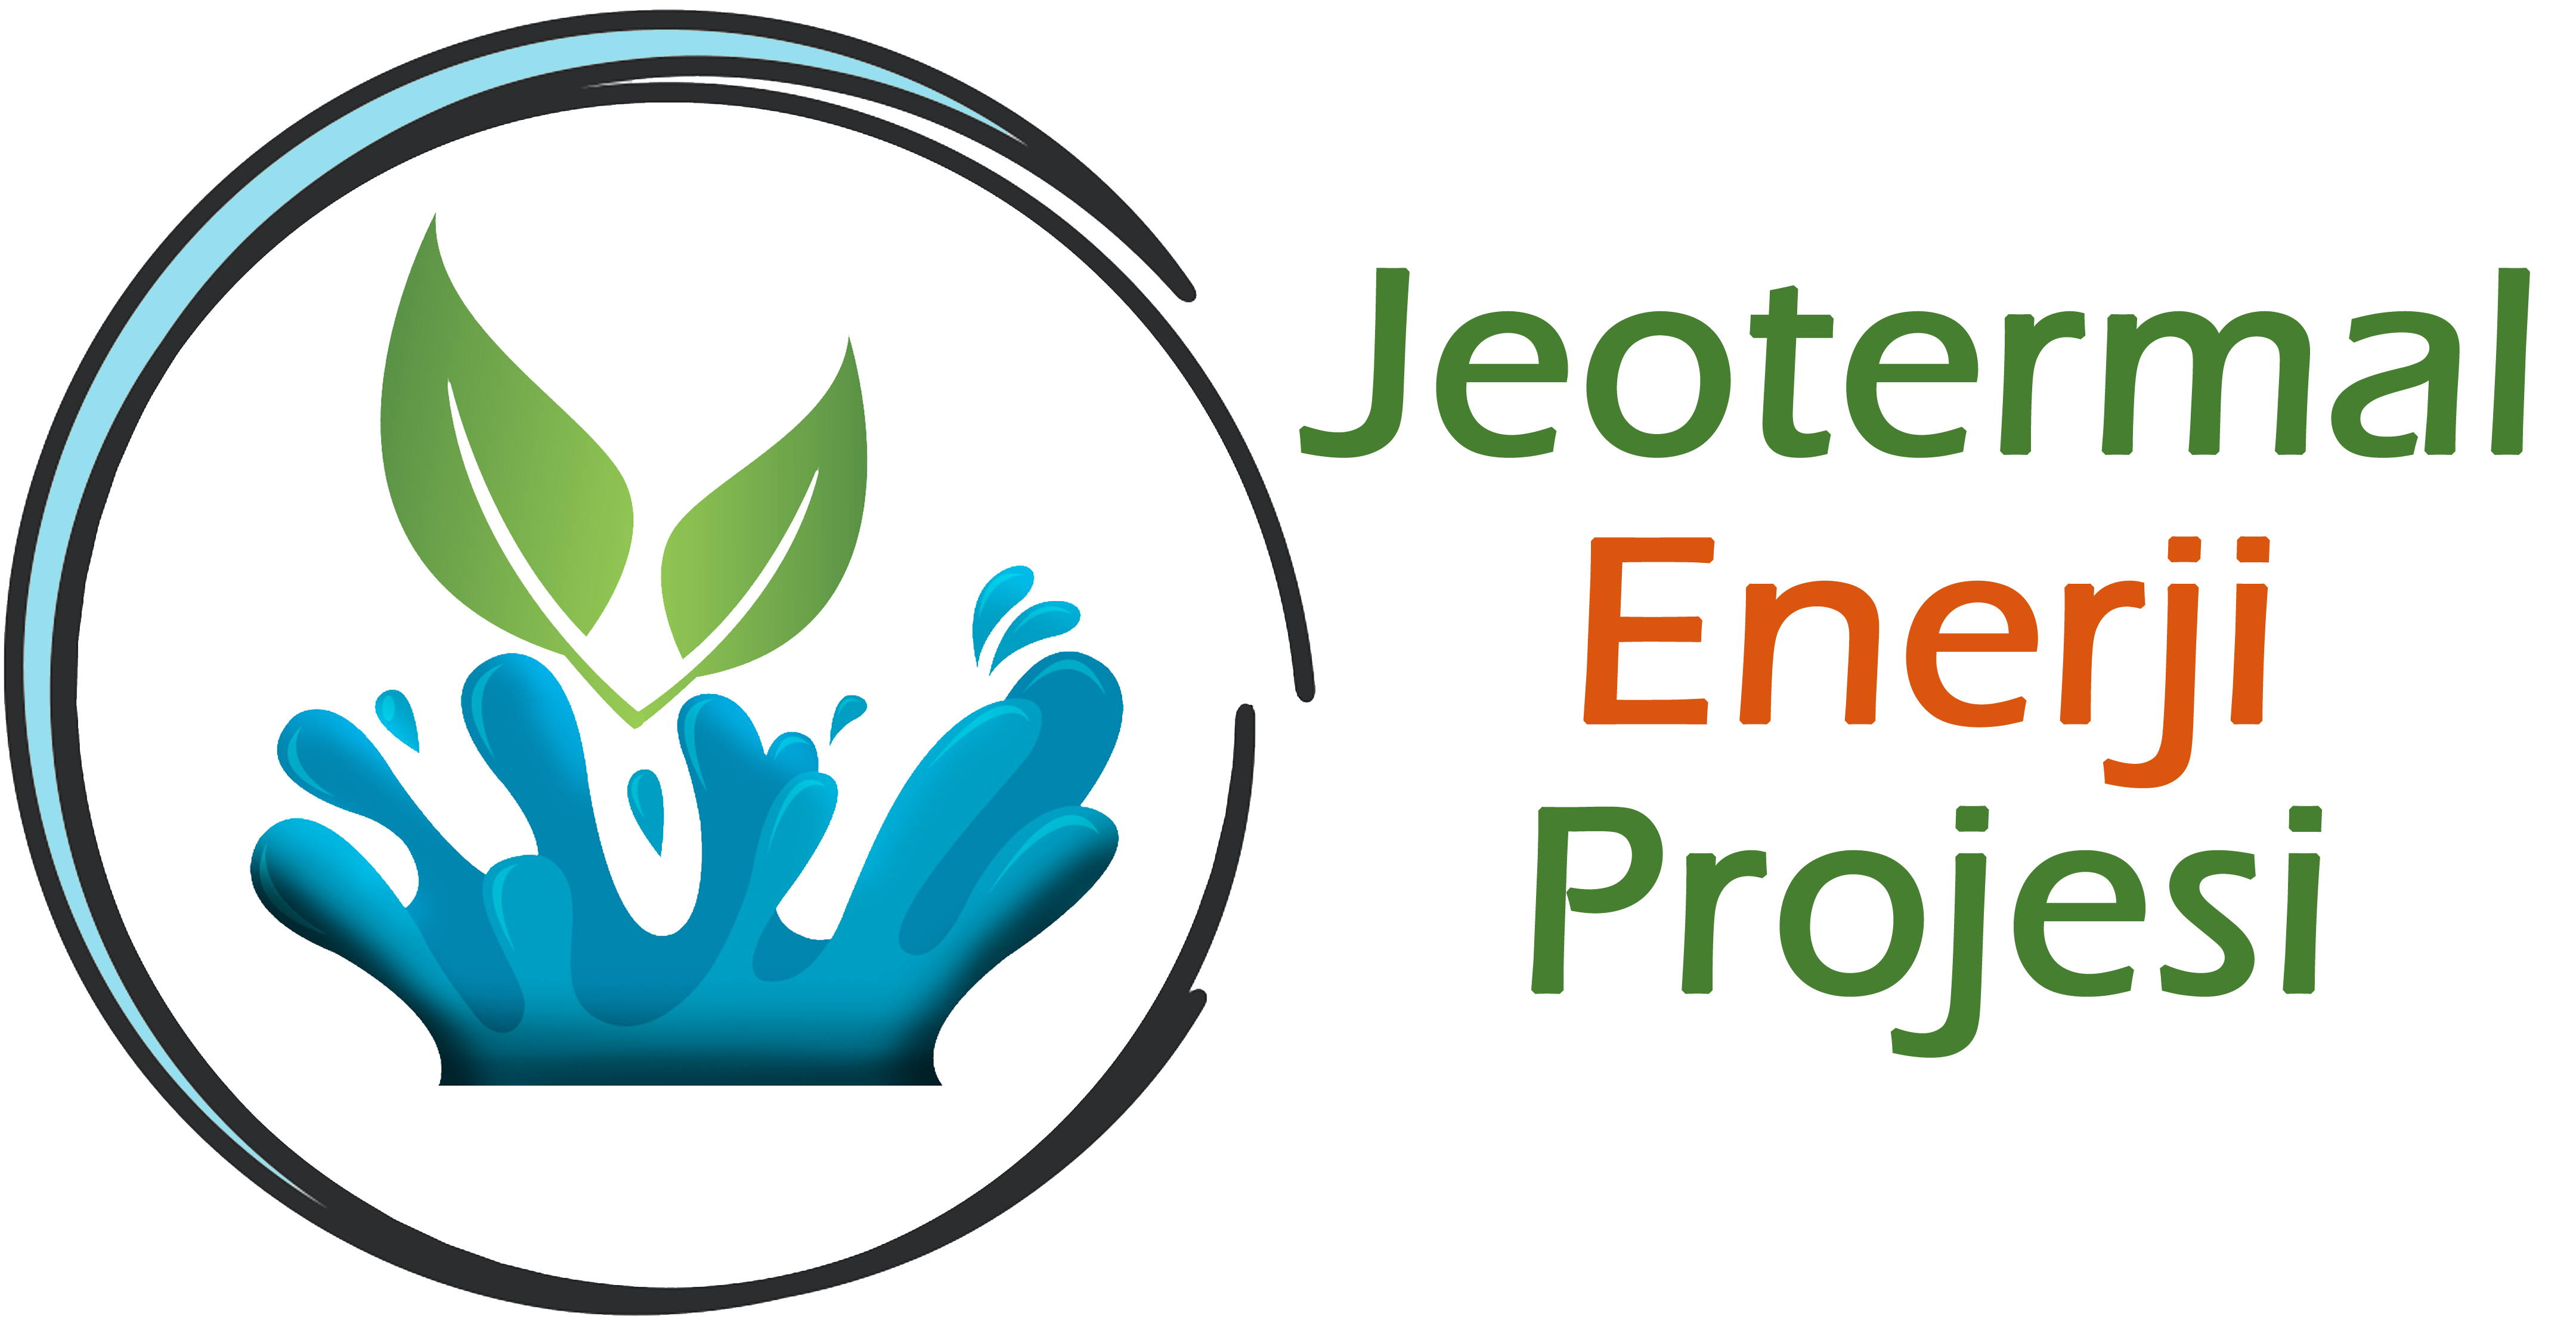 Development of Adult Skills in the Field of Geothermal Energy